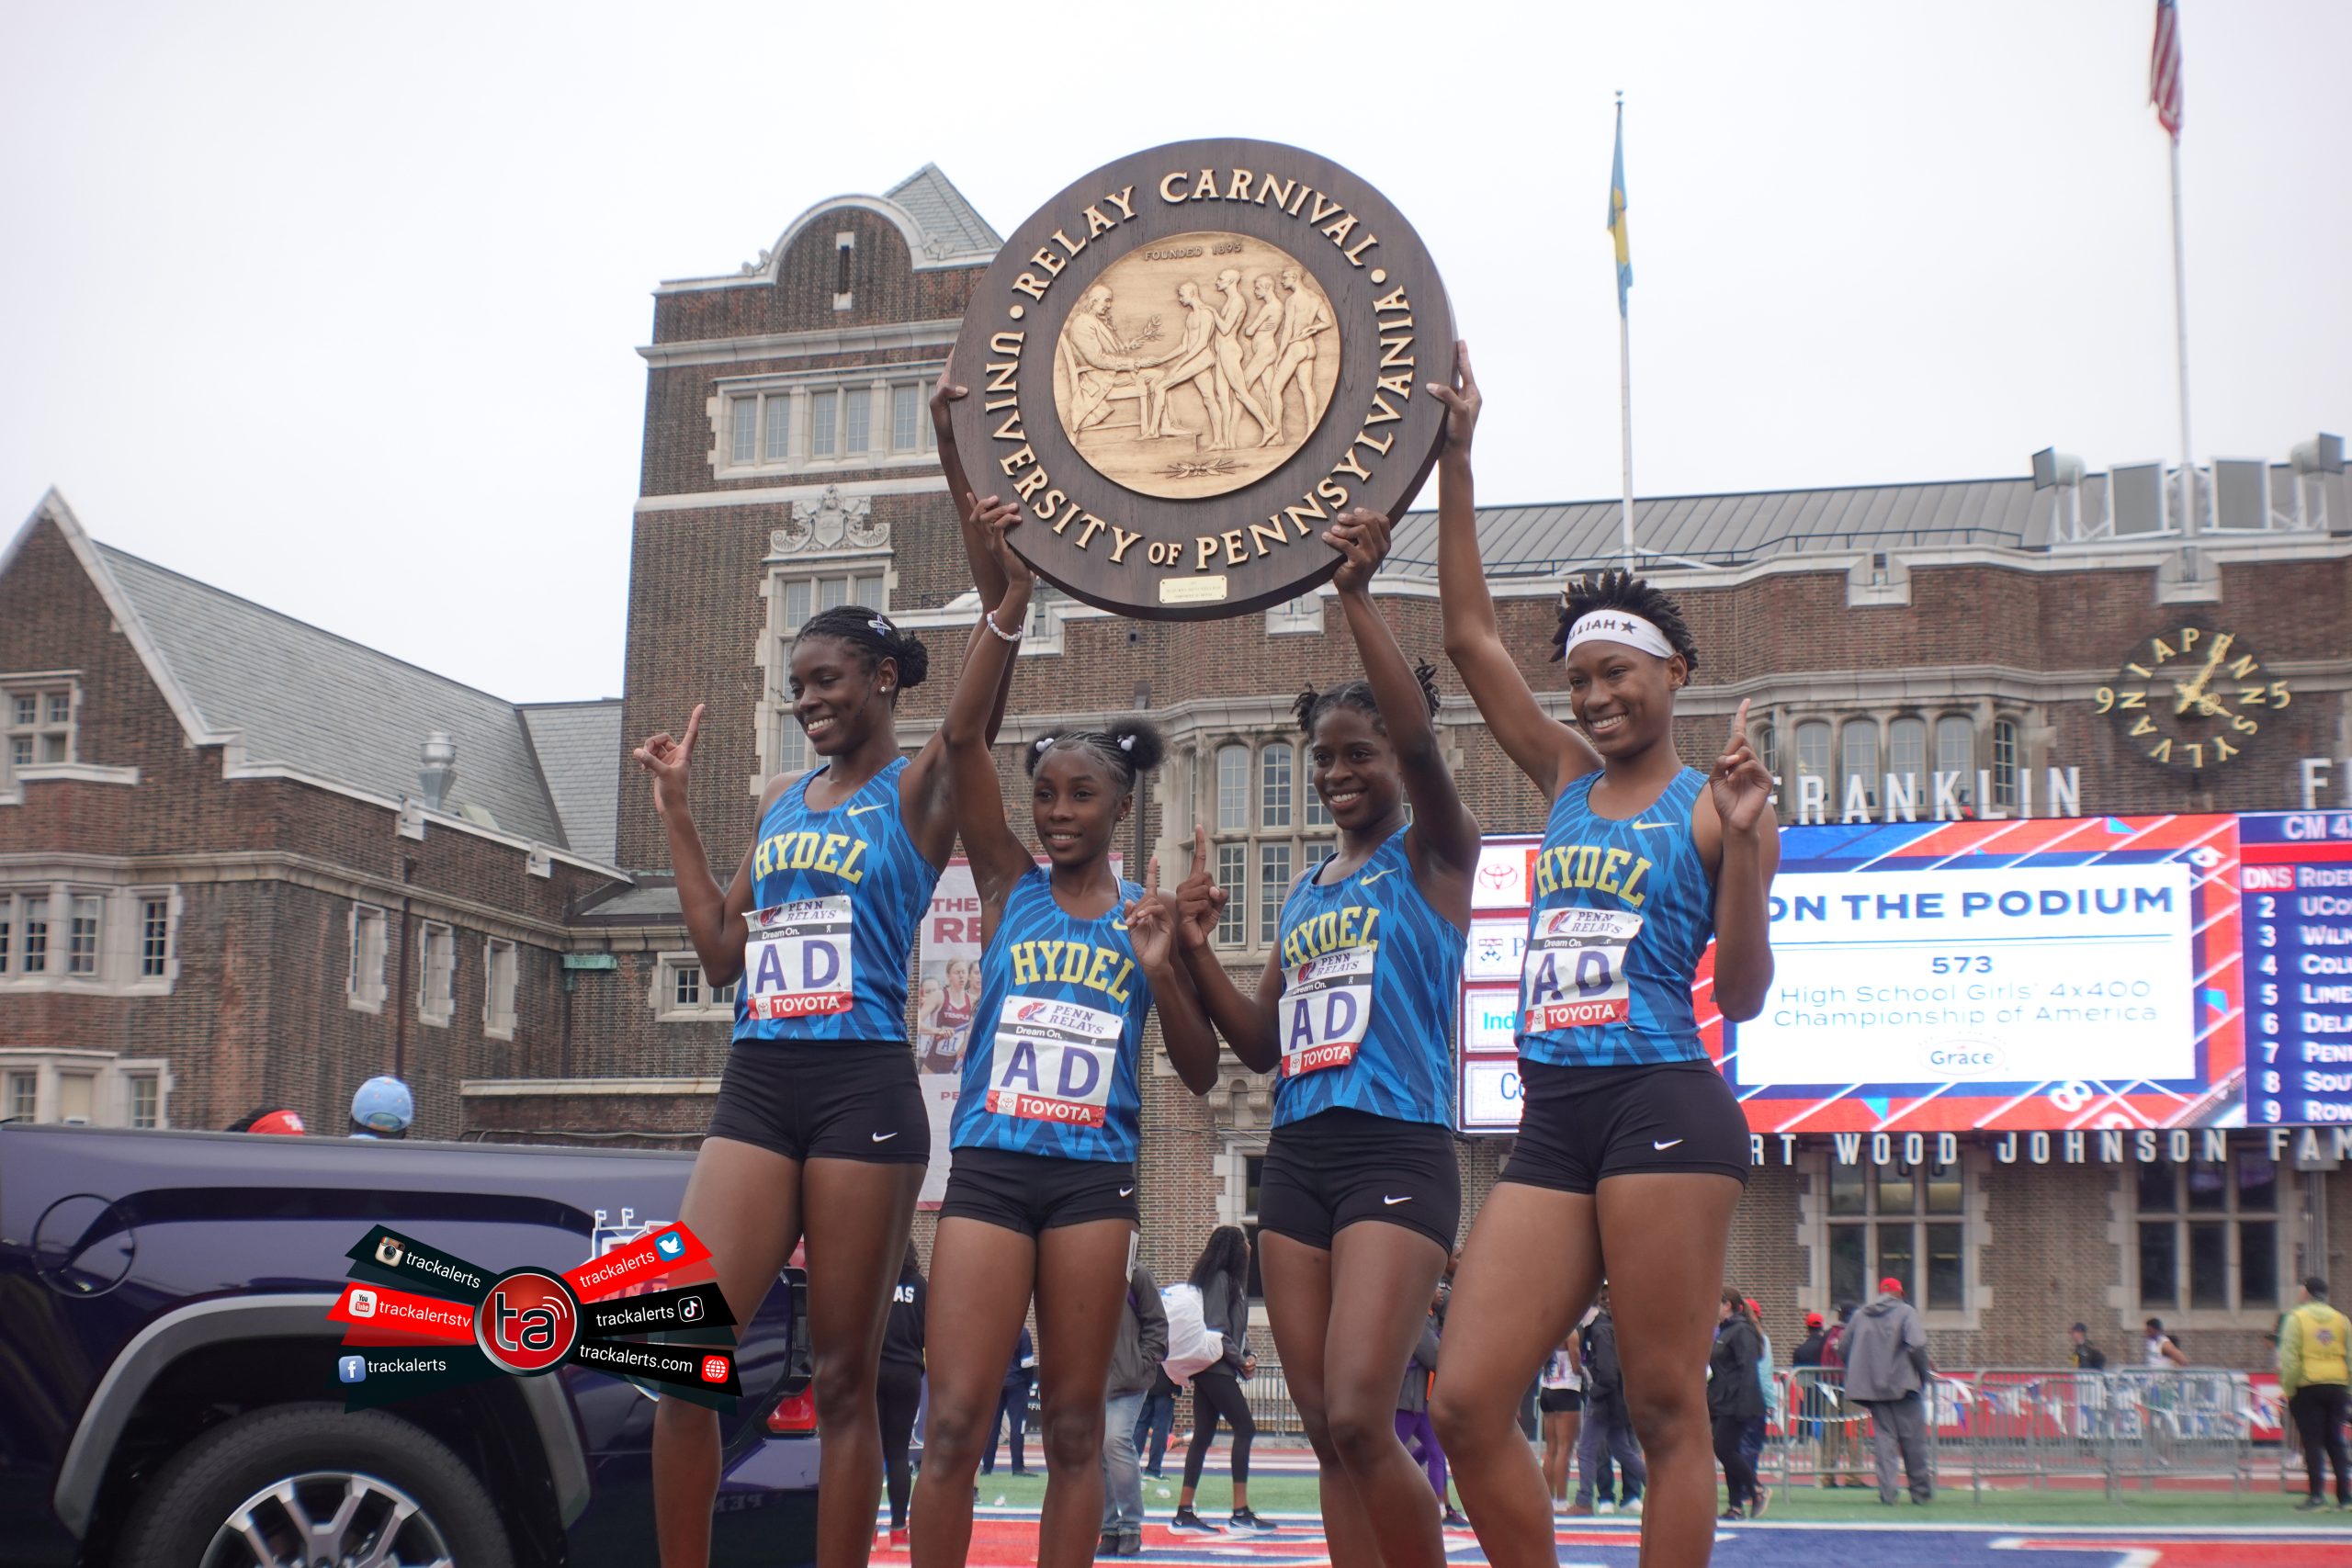 Hydel High School claims victory at competitive Penn Relays Championship